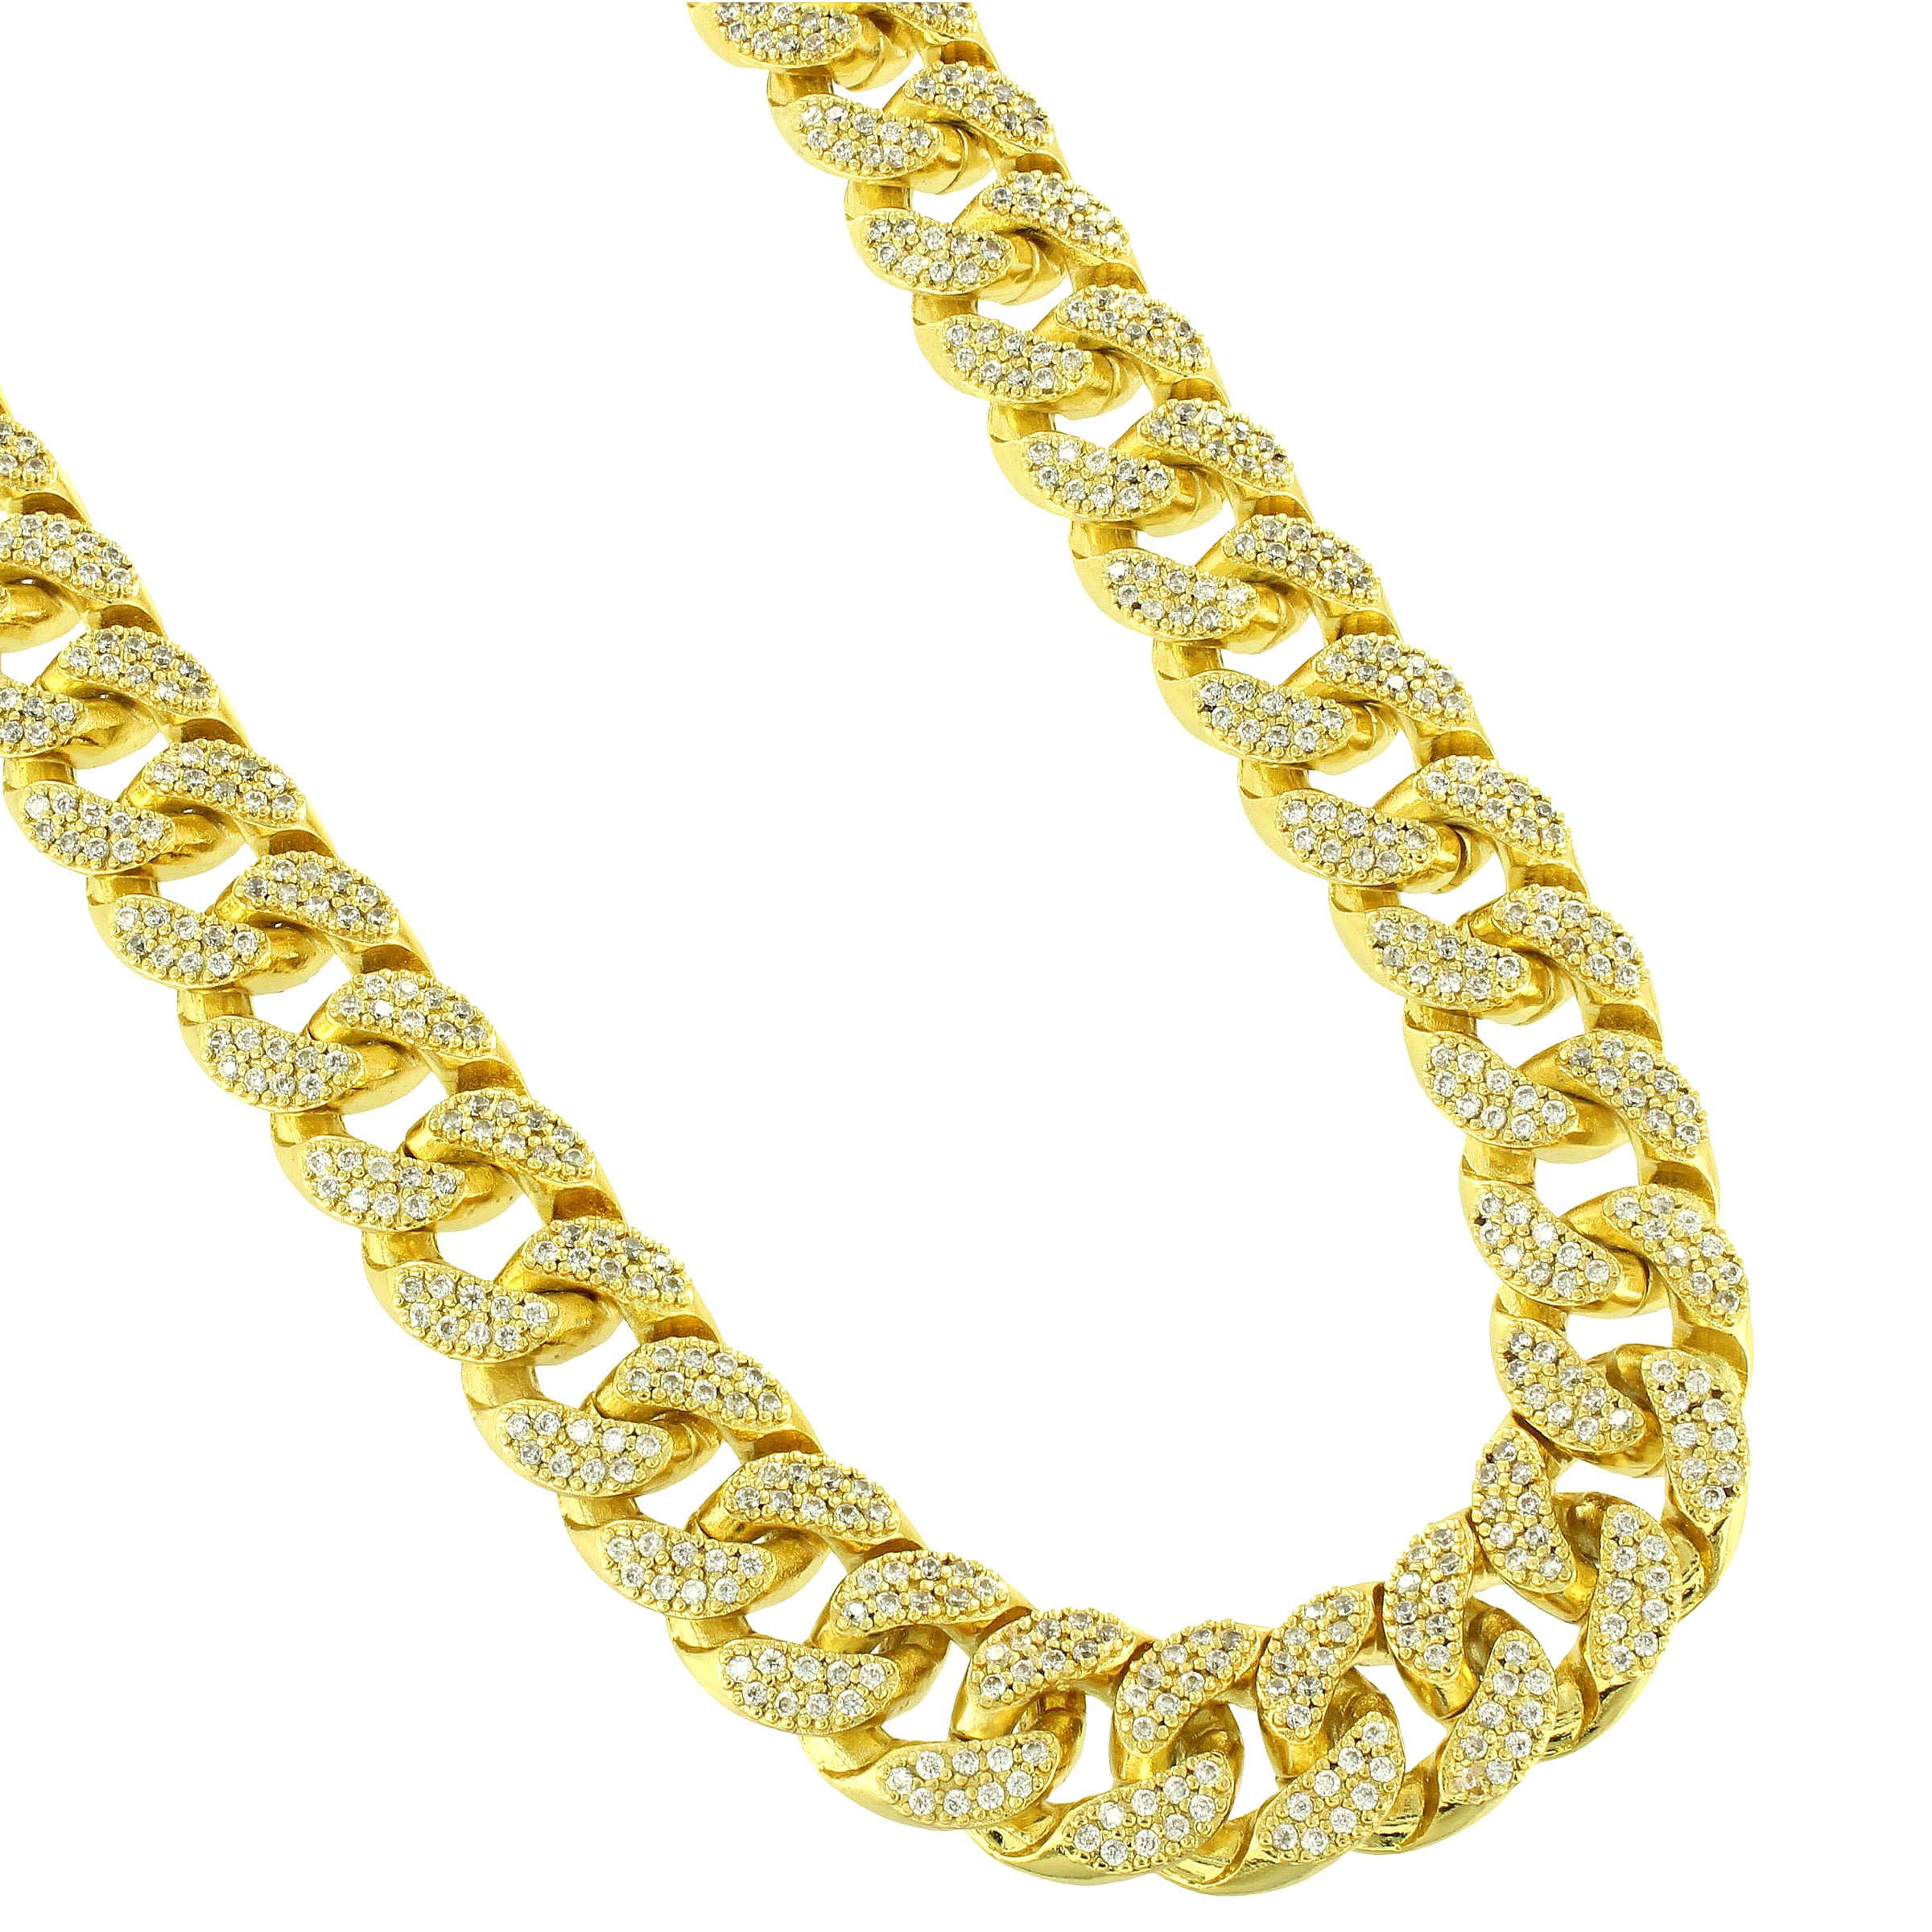 13mm 15mm x14x20-22 large link perfection Cuban curb chain necklace